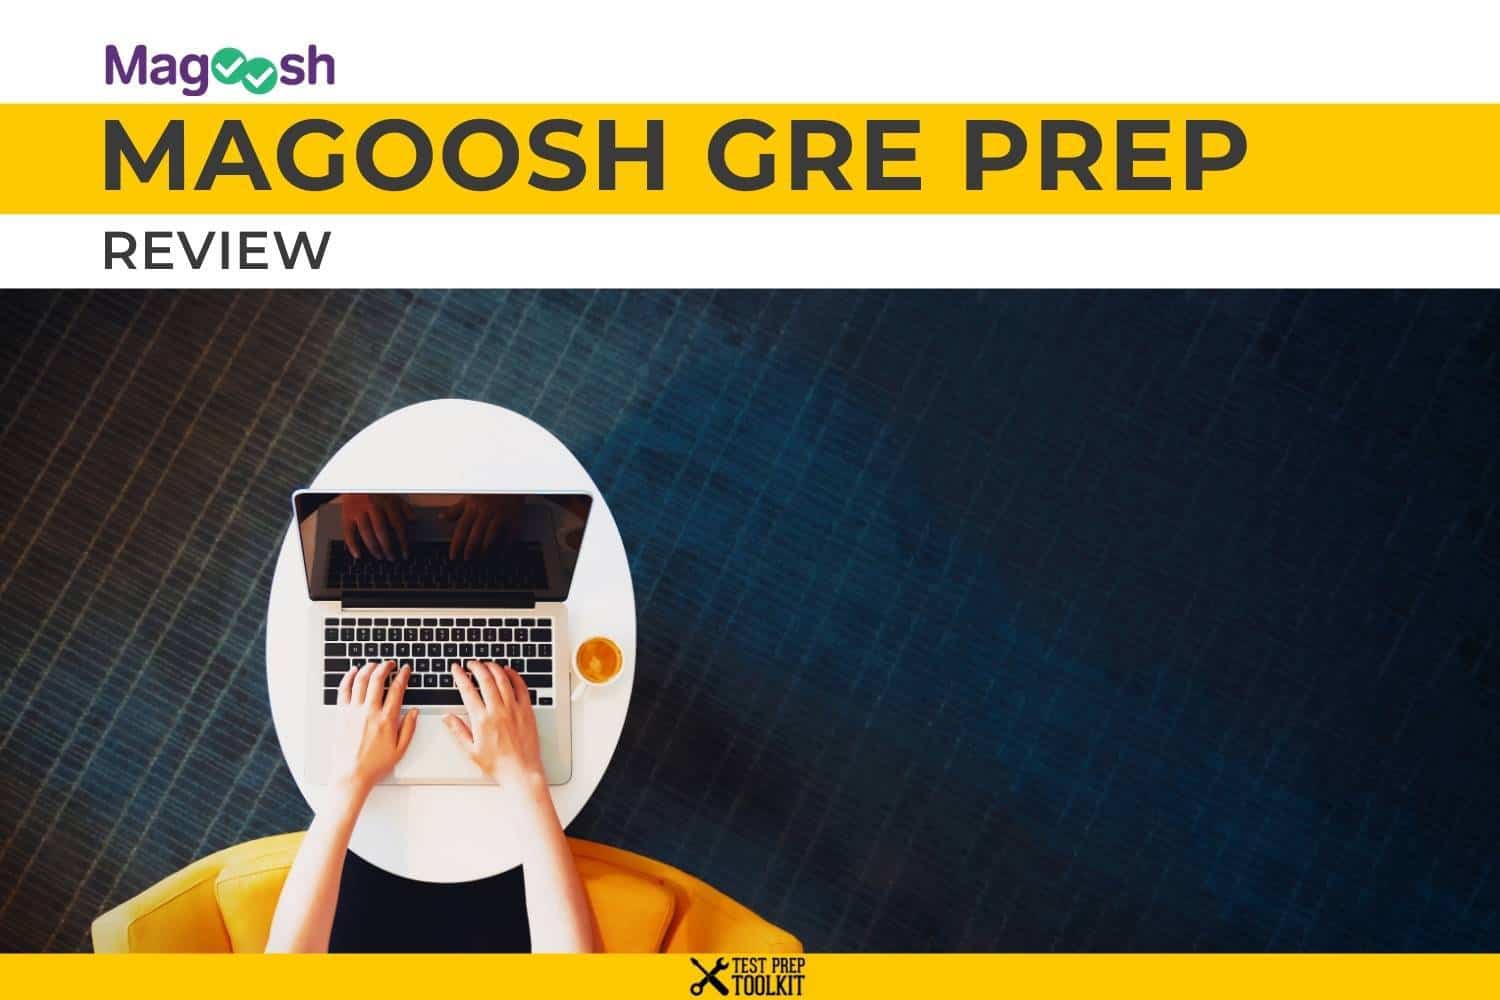 as premium students can i see magoosh gre videos offline